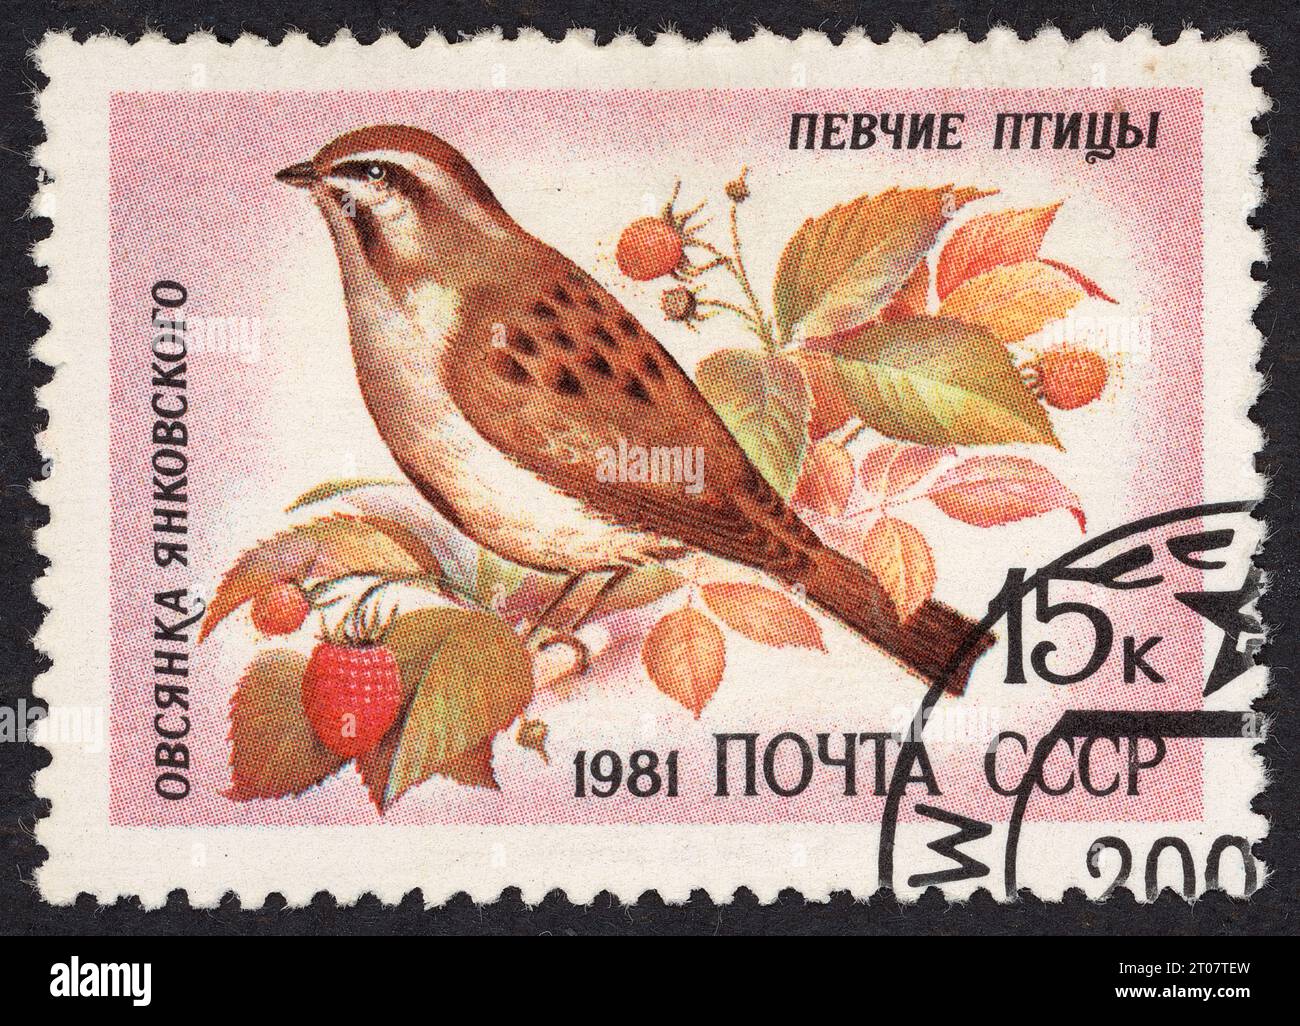 The Jankowski's bunting or rufous-backed bunting – Songbirds series. (Овсянка Янковского – Певчие птицы). Postage stamp issued in the USSR in 1981. Stock Photo